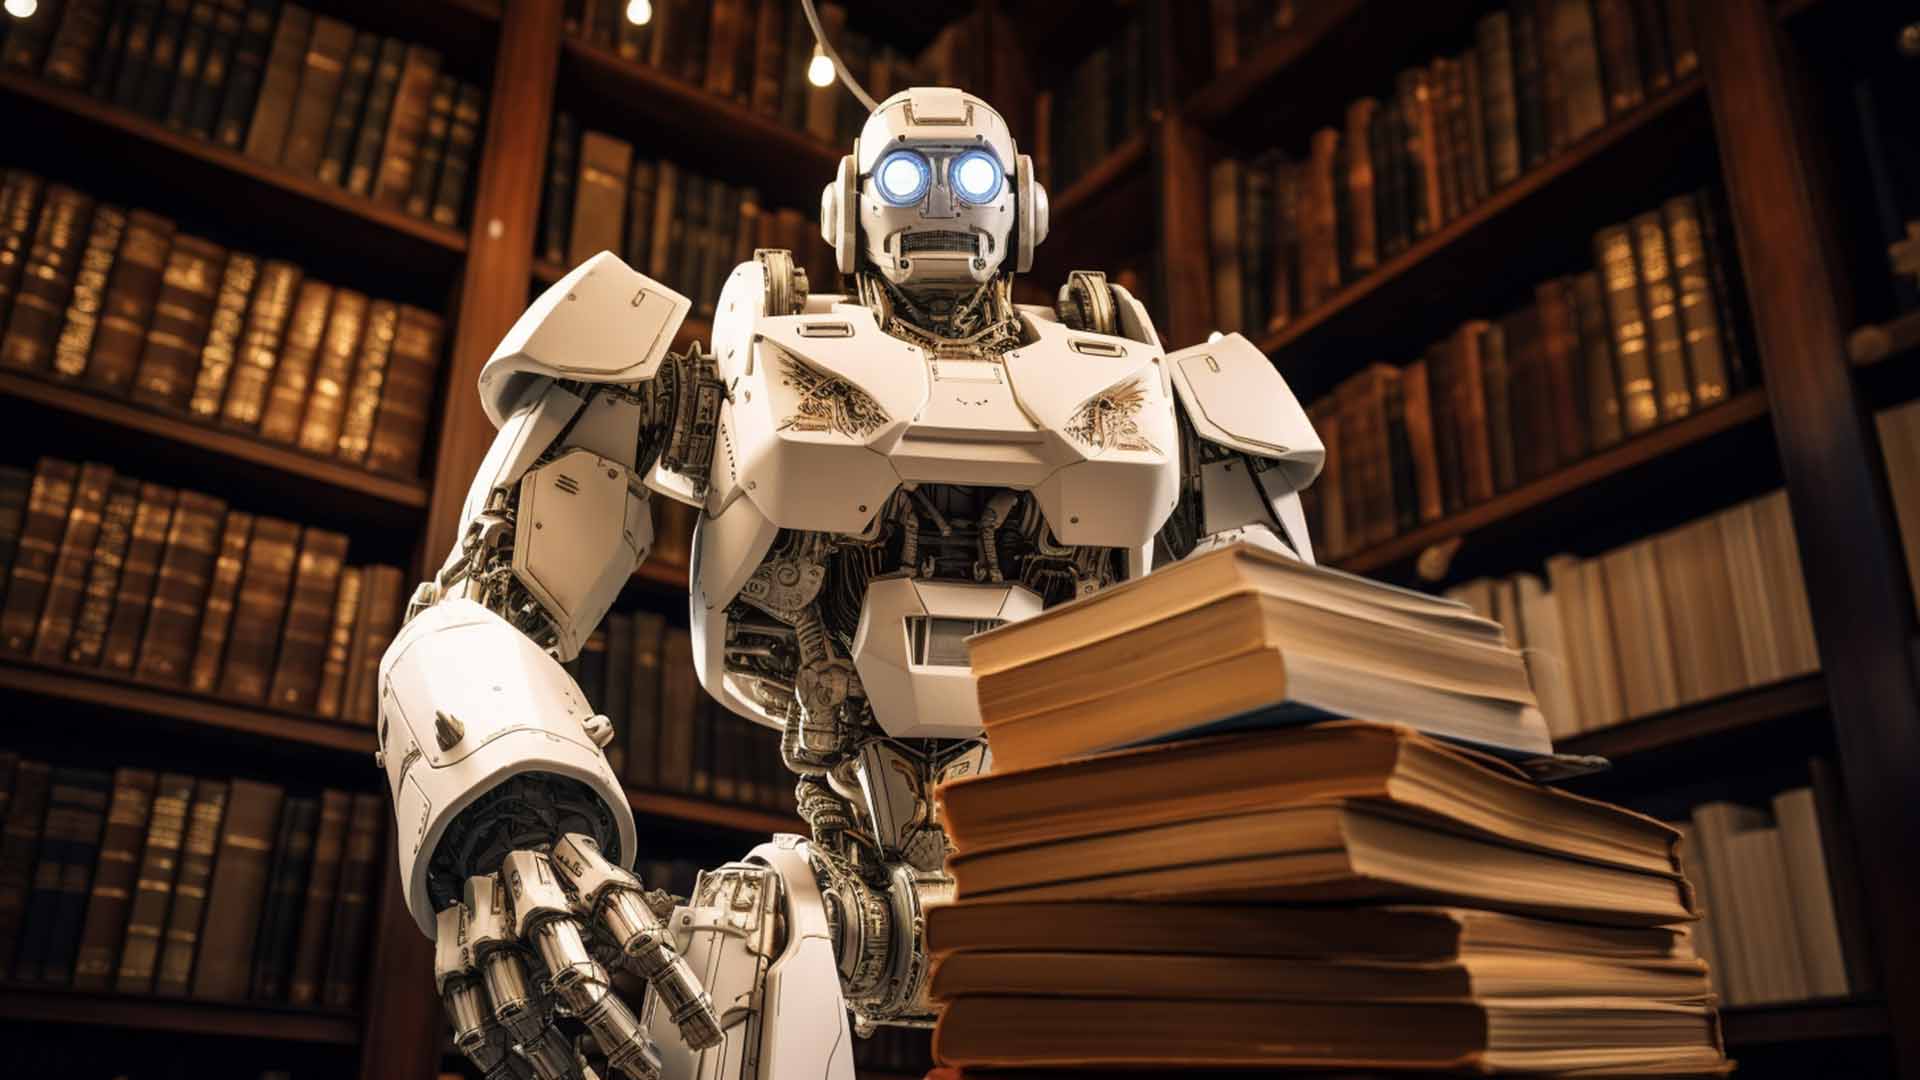 A Robot, Equipped With Ai Technology, Stands In Front Of Books In A Library And Is Ready To Learn About &Quot;Can You Use Midjourney Images Commercially?&Quot;